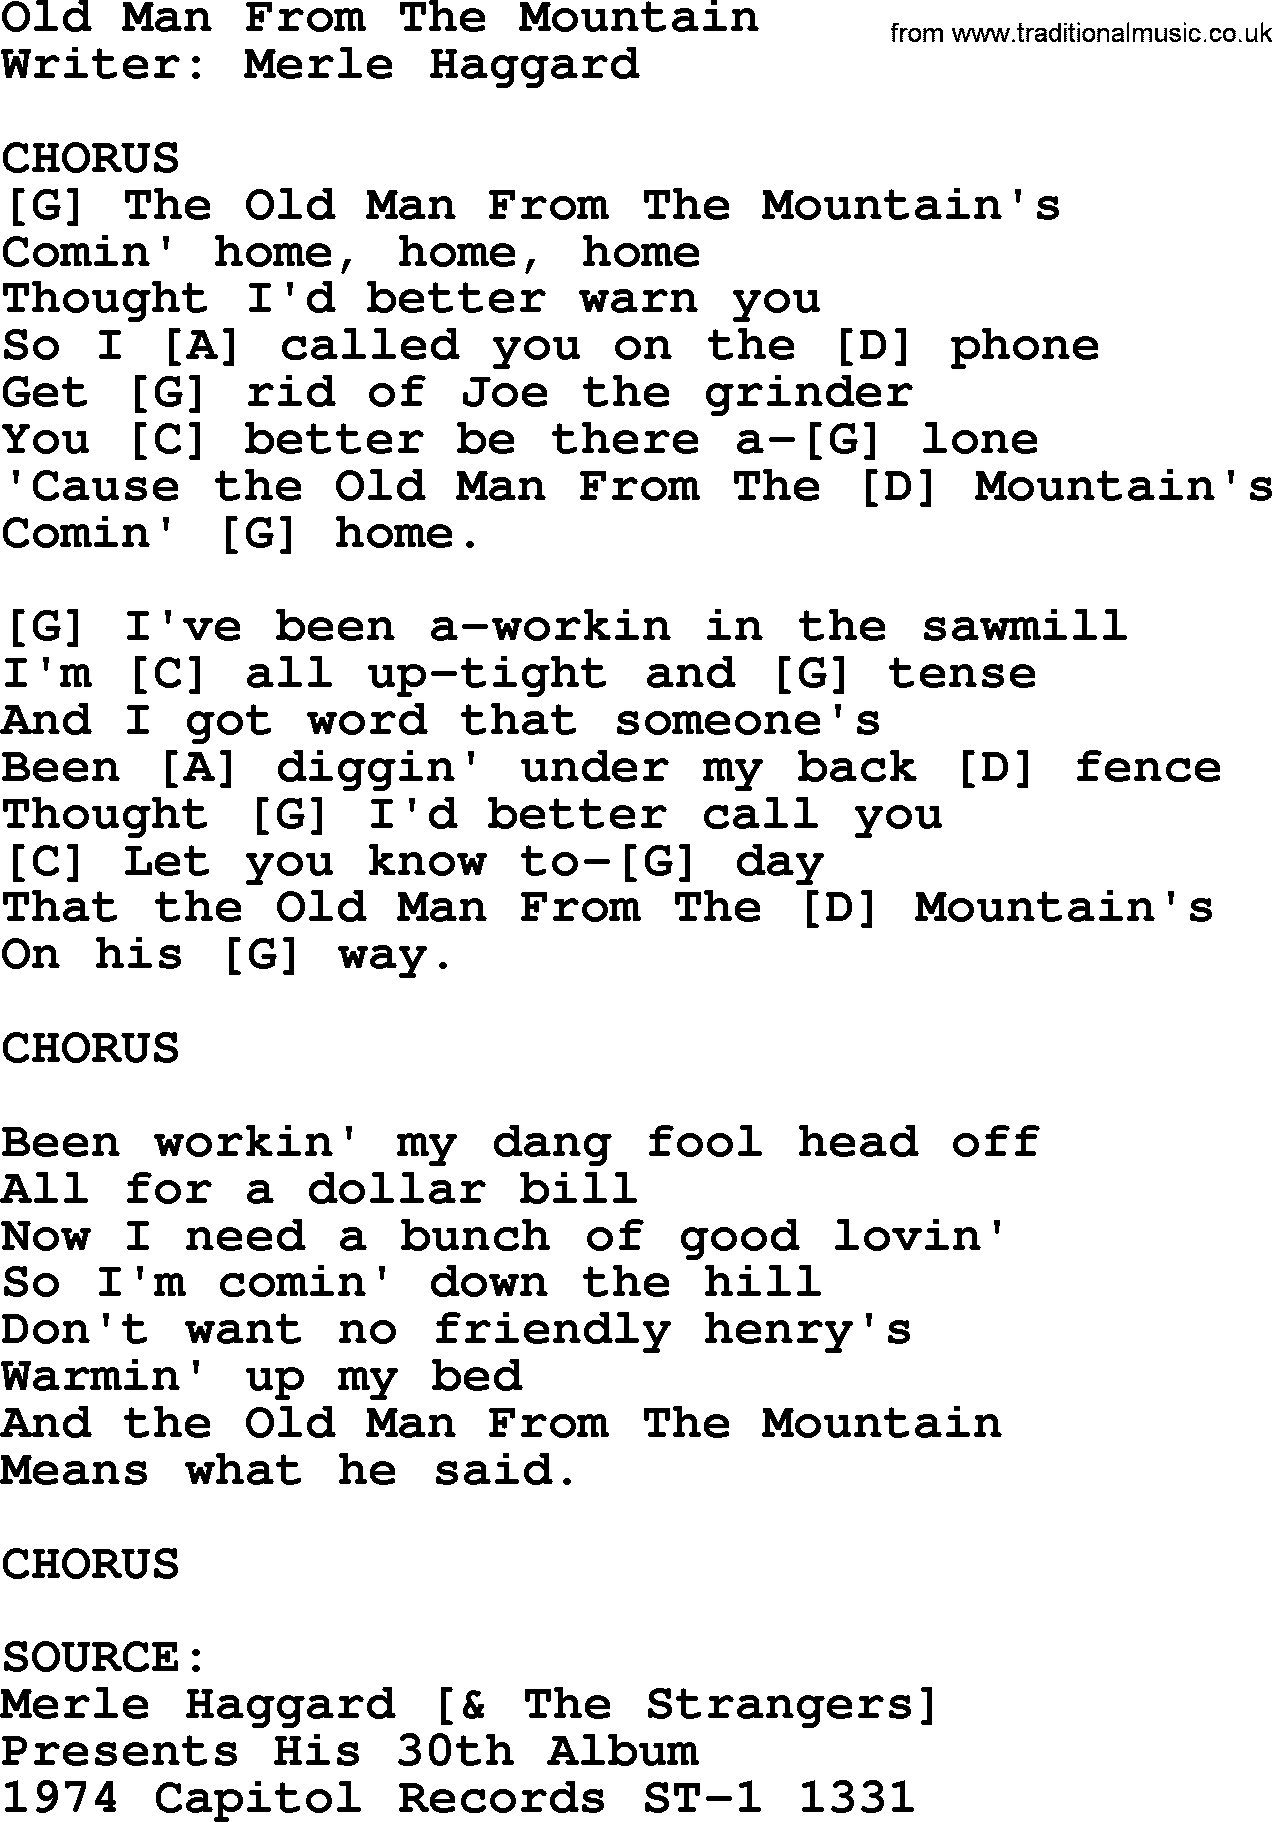 Merle Haggard song: Old Man From The Mountain, lyrics and chords